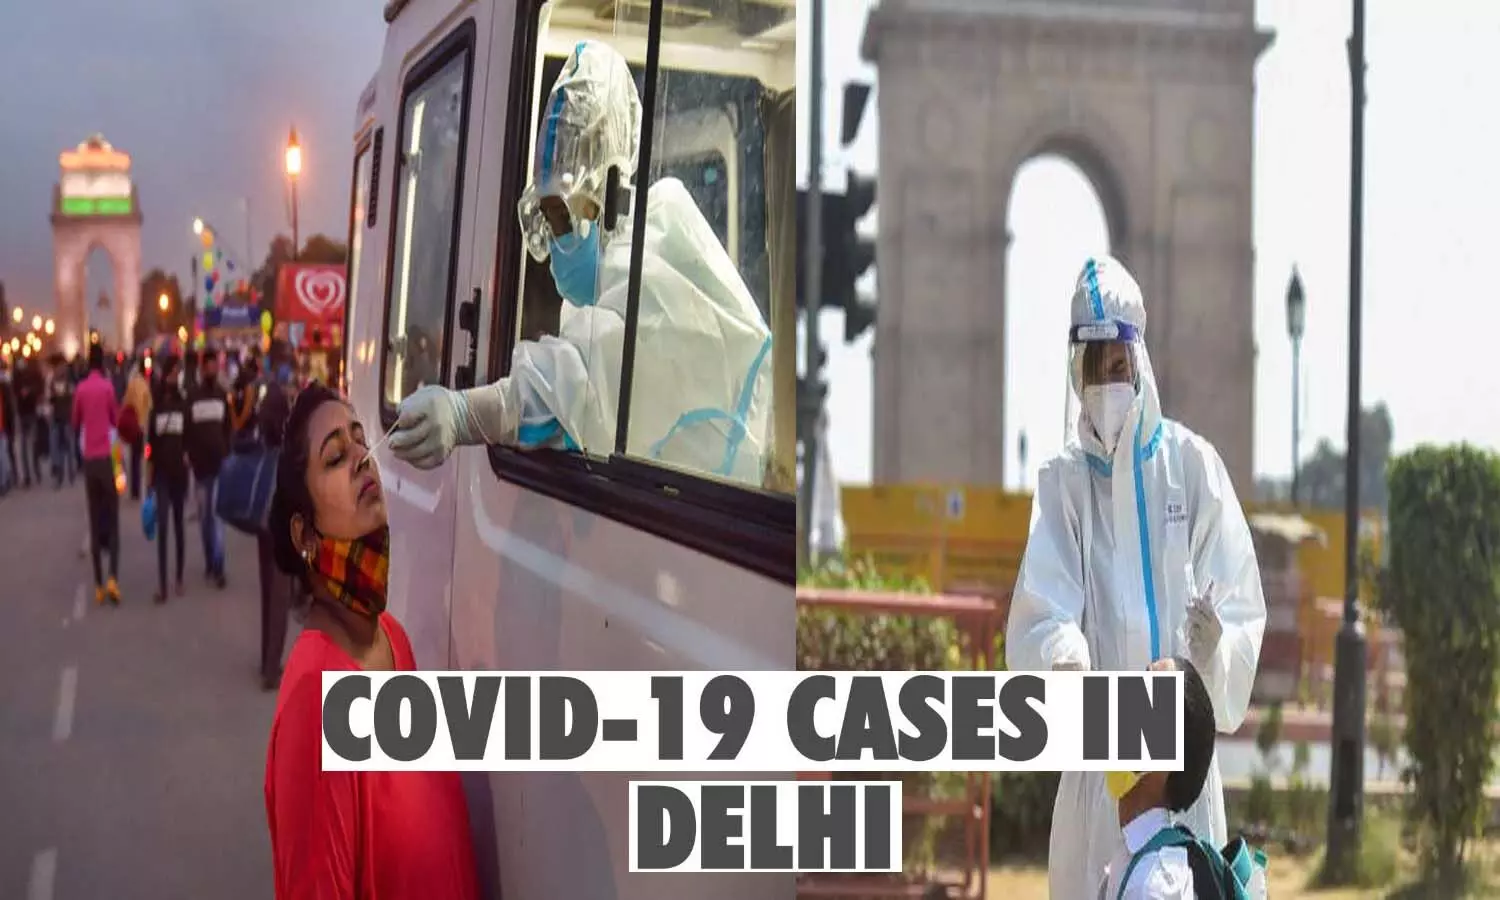 Corona Cases In New Delhi: 12527 new corona infected cases in Delhi in the last 24 hours, 27 deaths, decrease in infection rate